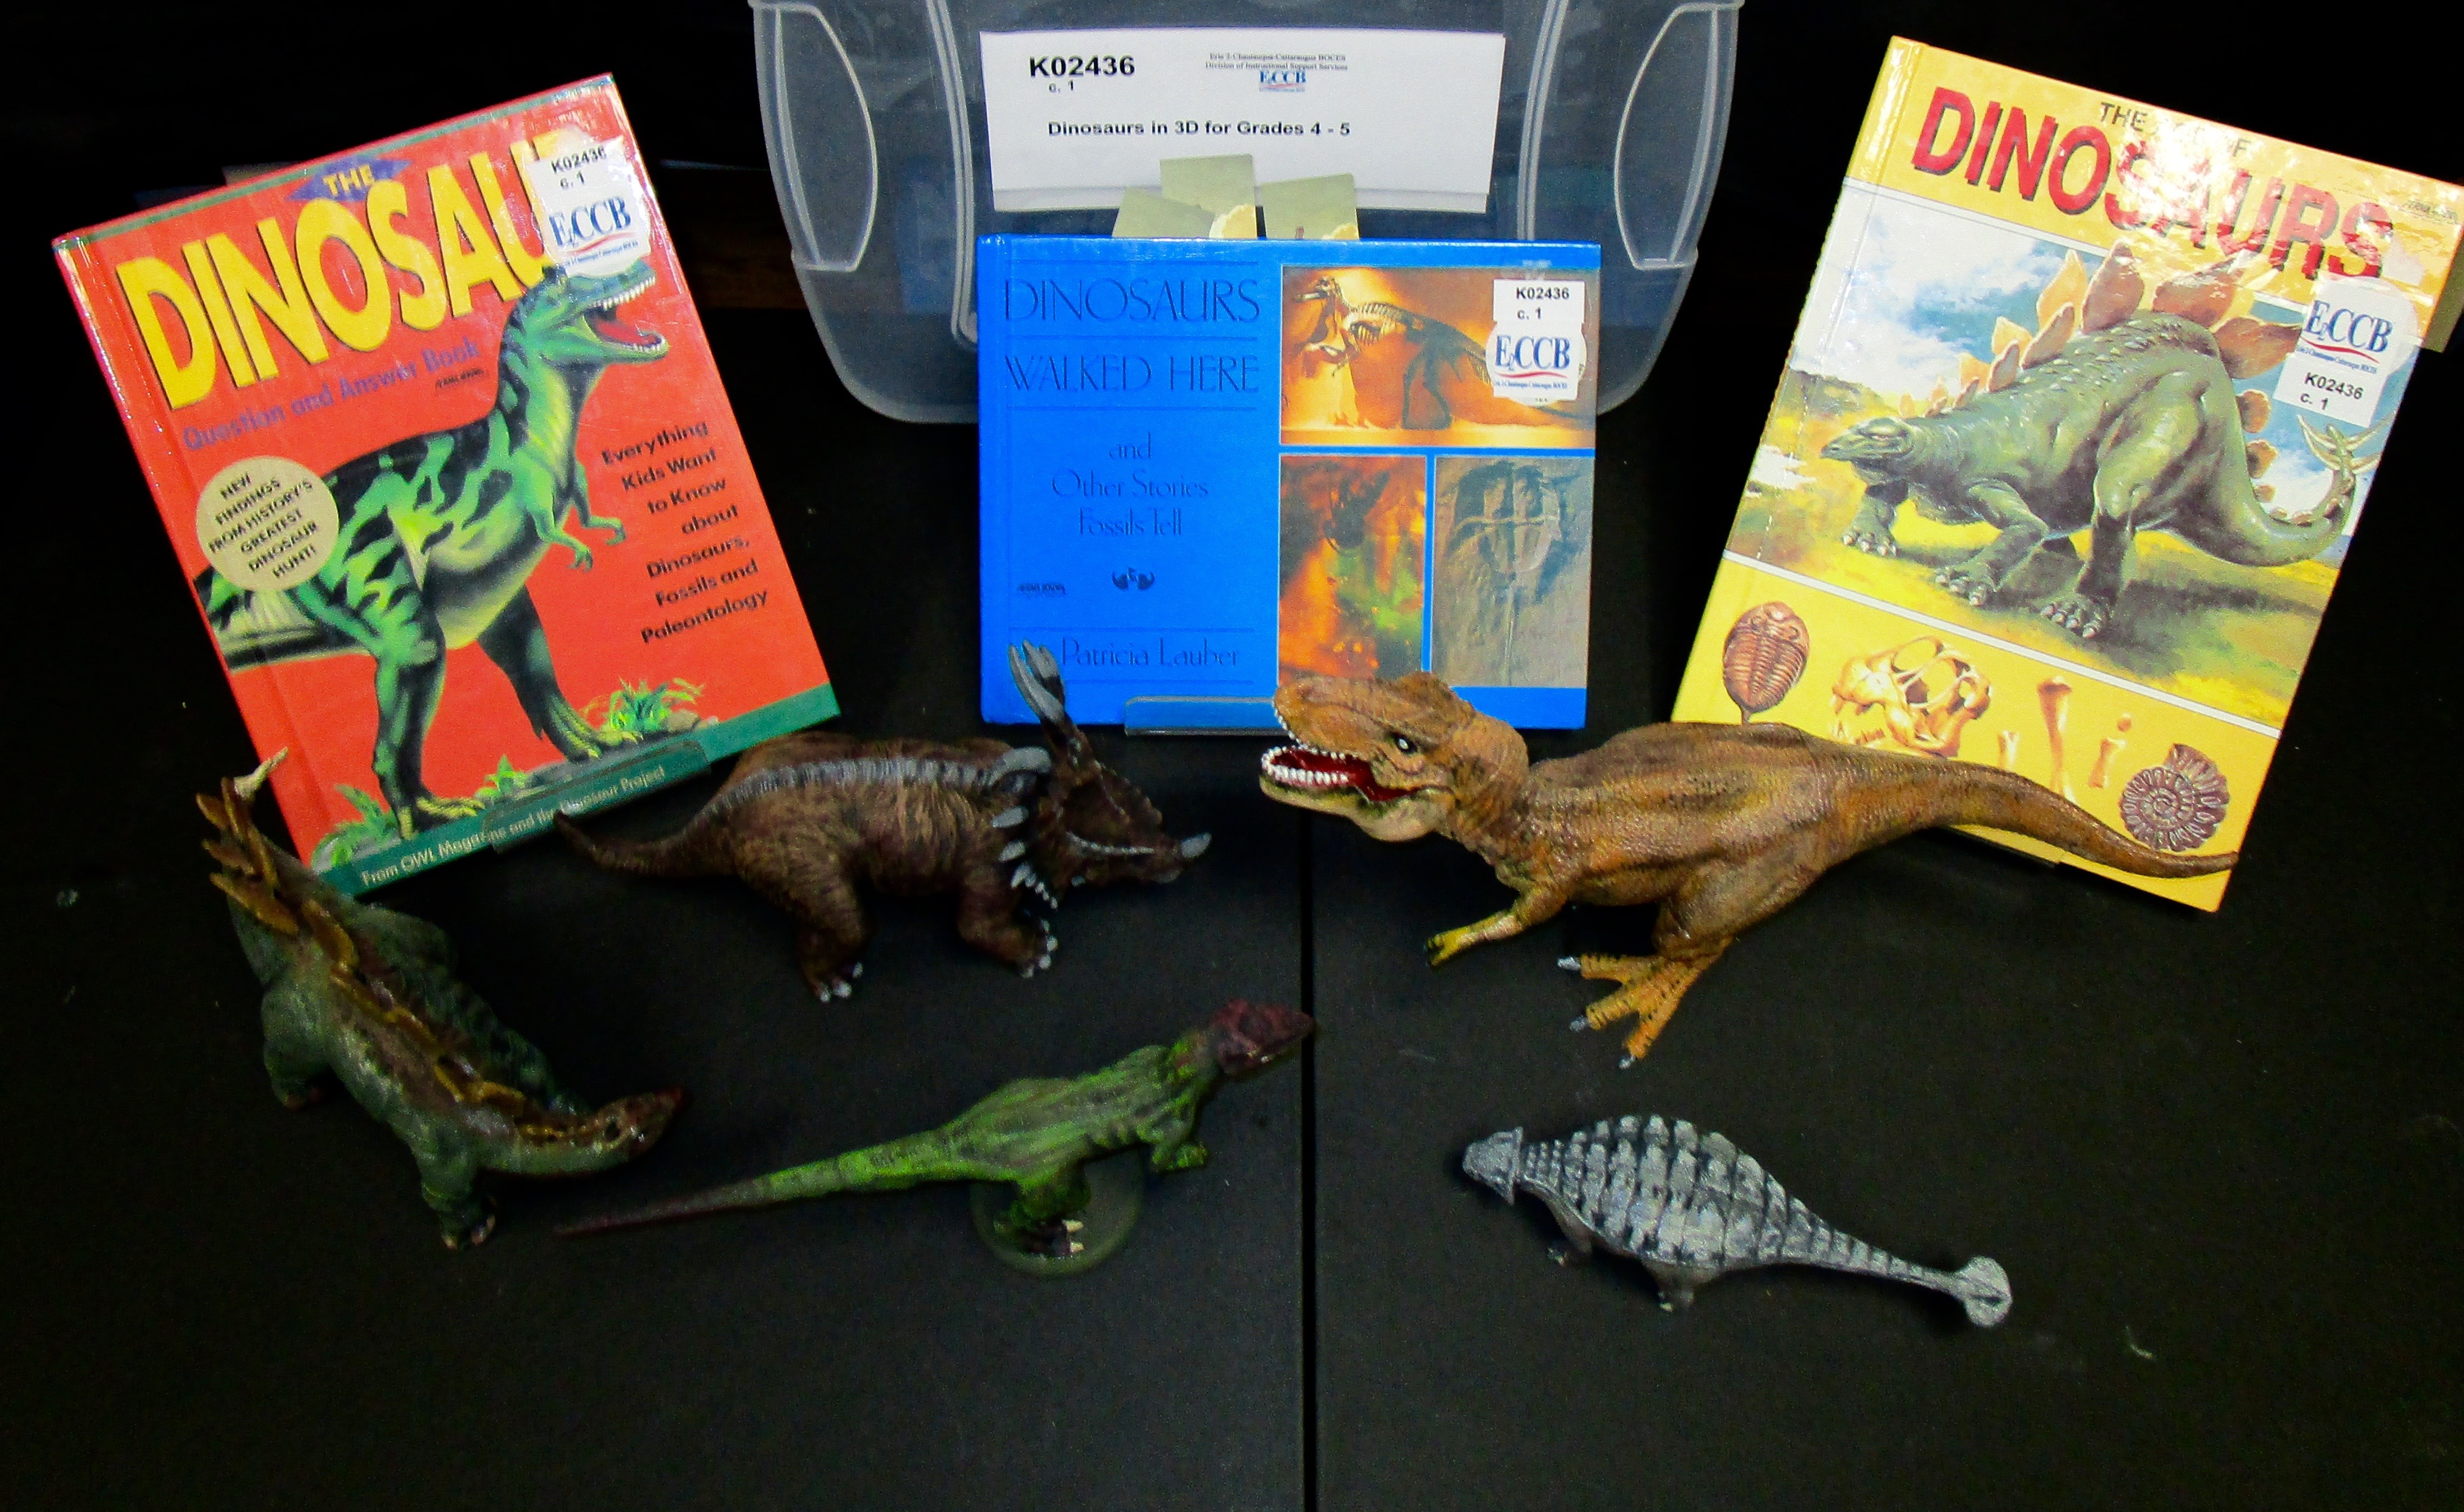 Dinosaurs in 3D for Grades 4 - 5